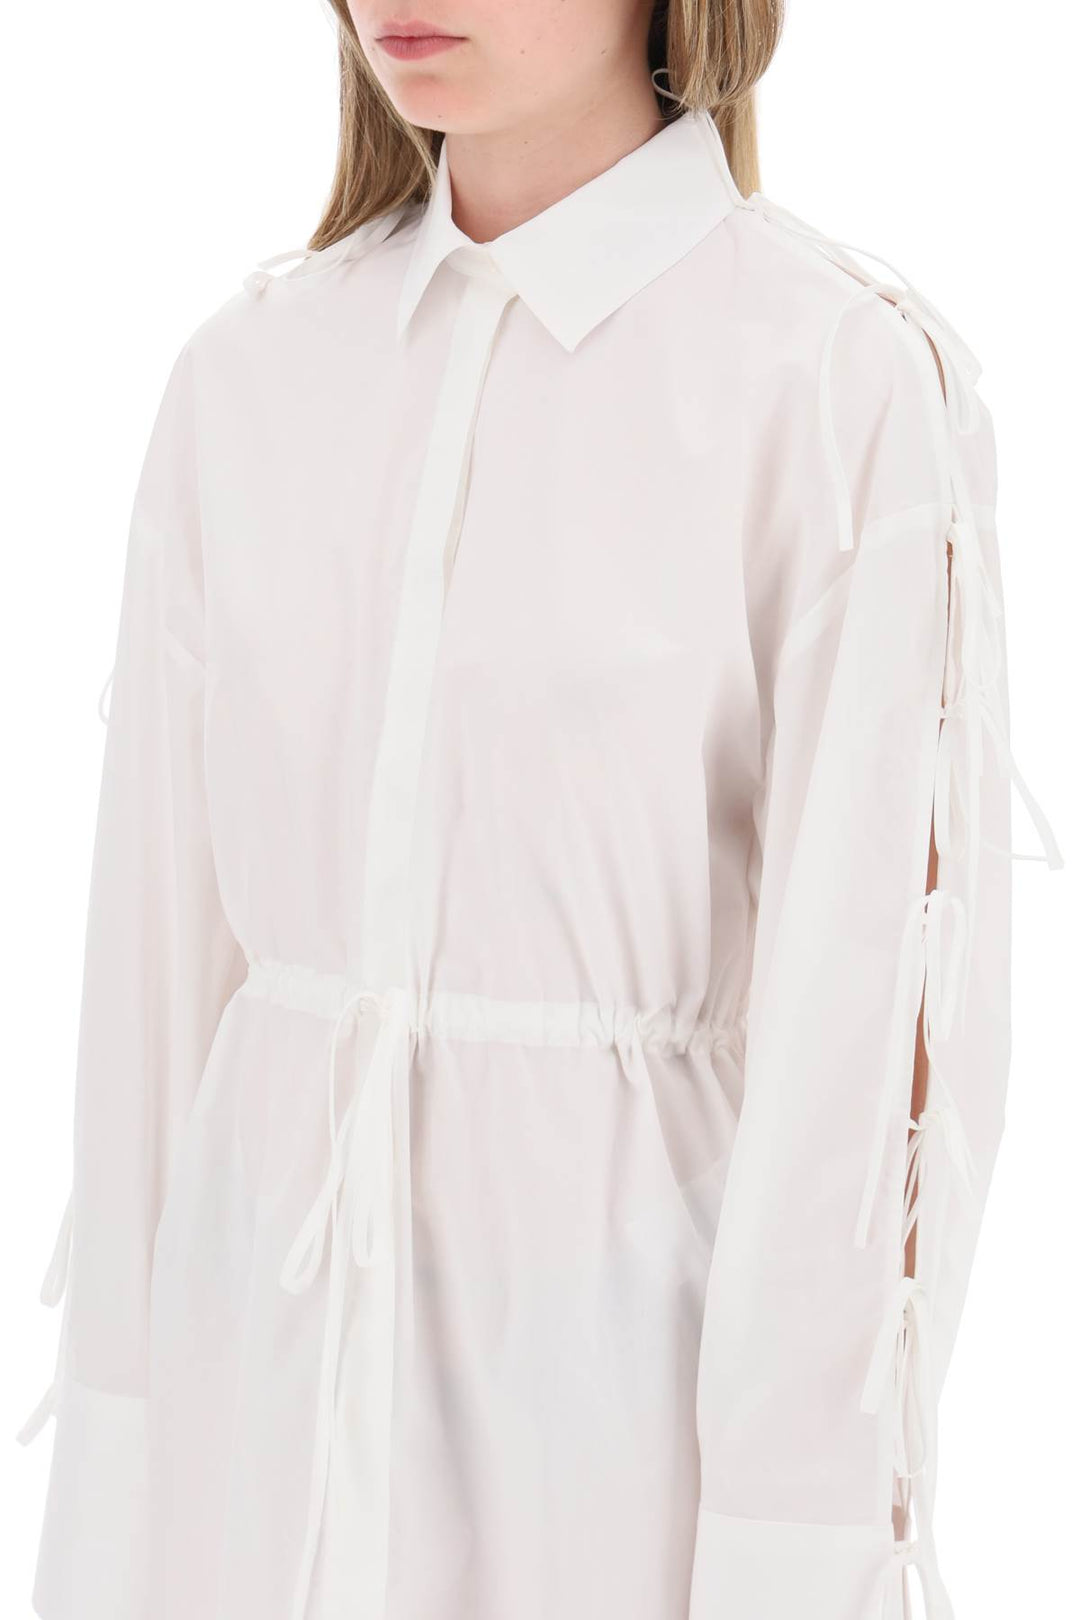 Msgm Mini Shirt Dress With Cut Outs And Bows   Bianco